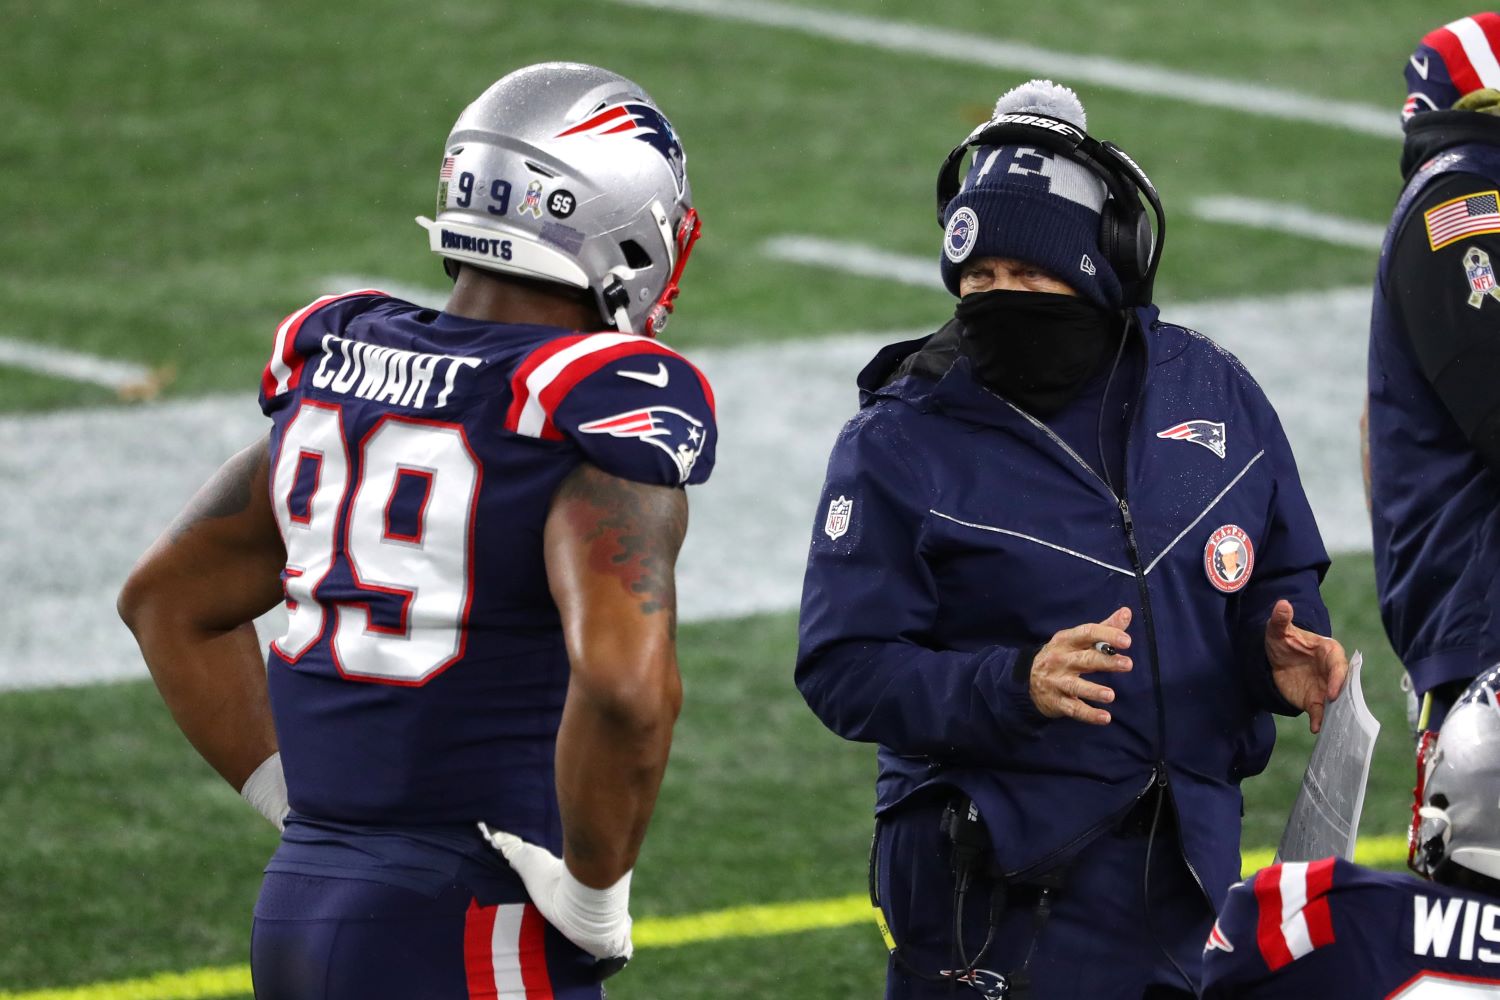 Bill Belichick has the Patriots in a position to compete for a playoff spot this season because he is embracing the philosophy of letting young players get on the field.